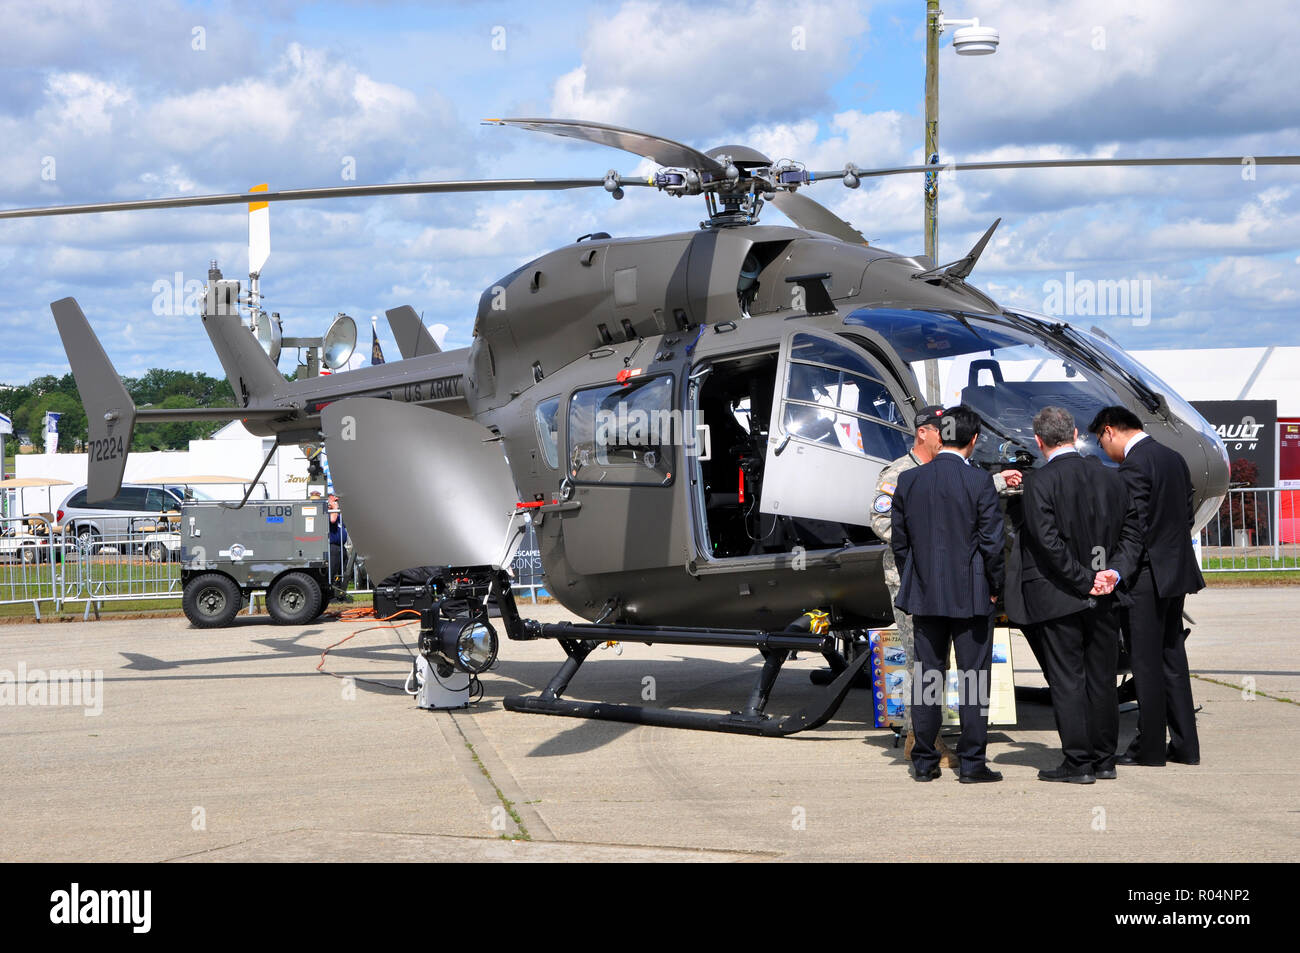 Eurocopter Airbus Helicopters EADS UH-72 Lakota twin-engine helicopter at the Farnborough International Airshow. The UH-72 is a militarized version Stock Photo